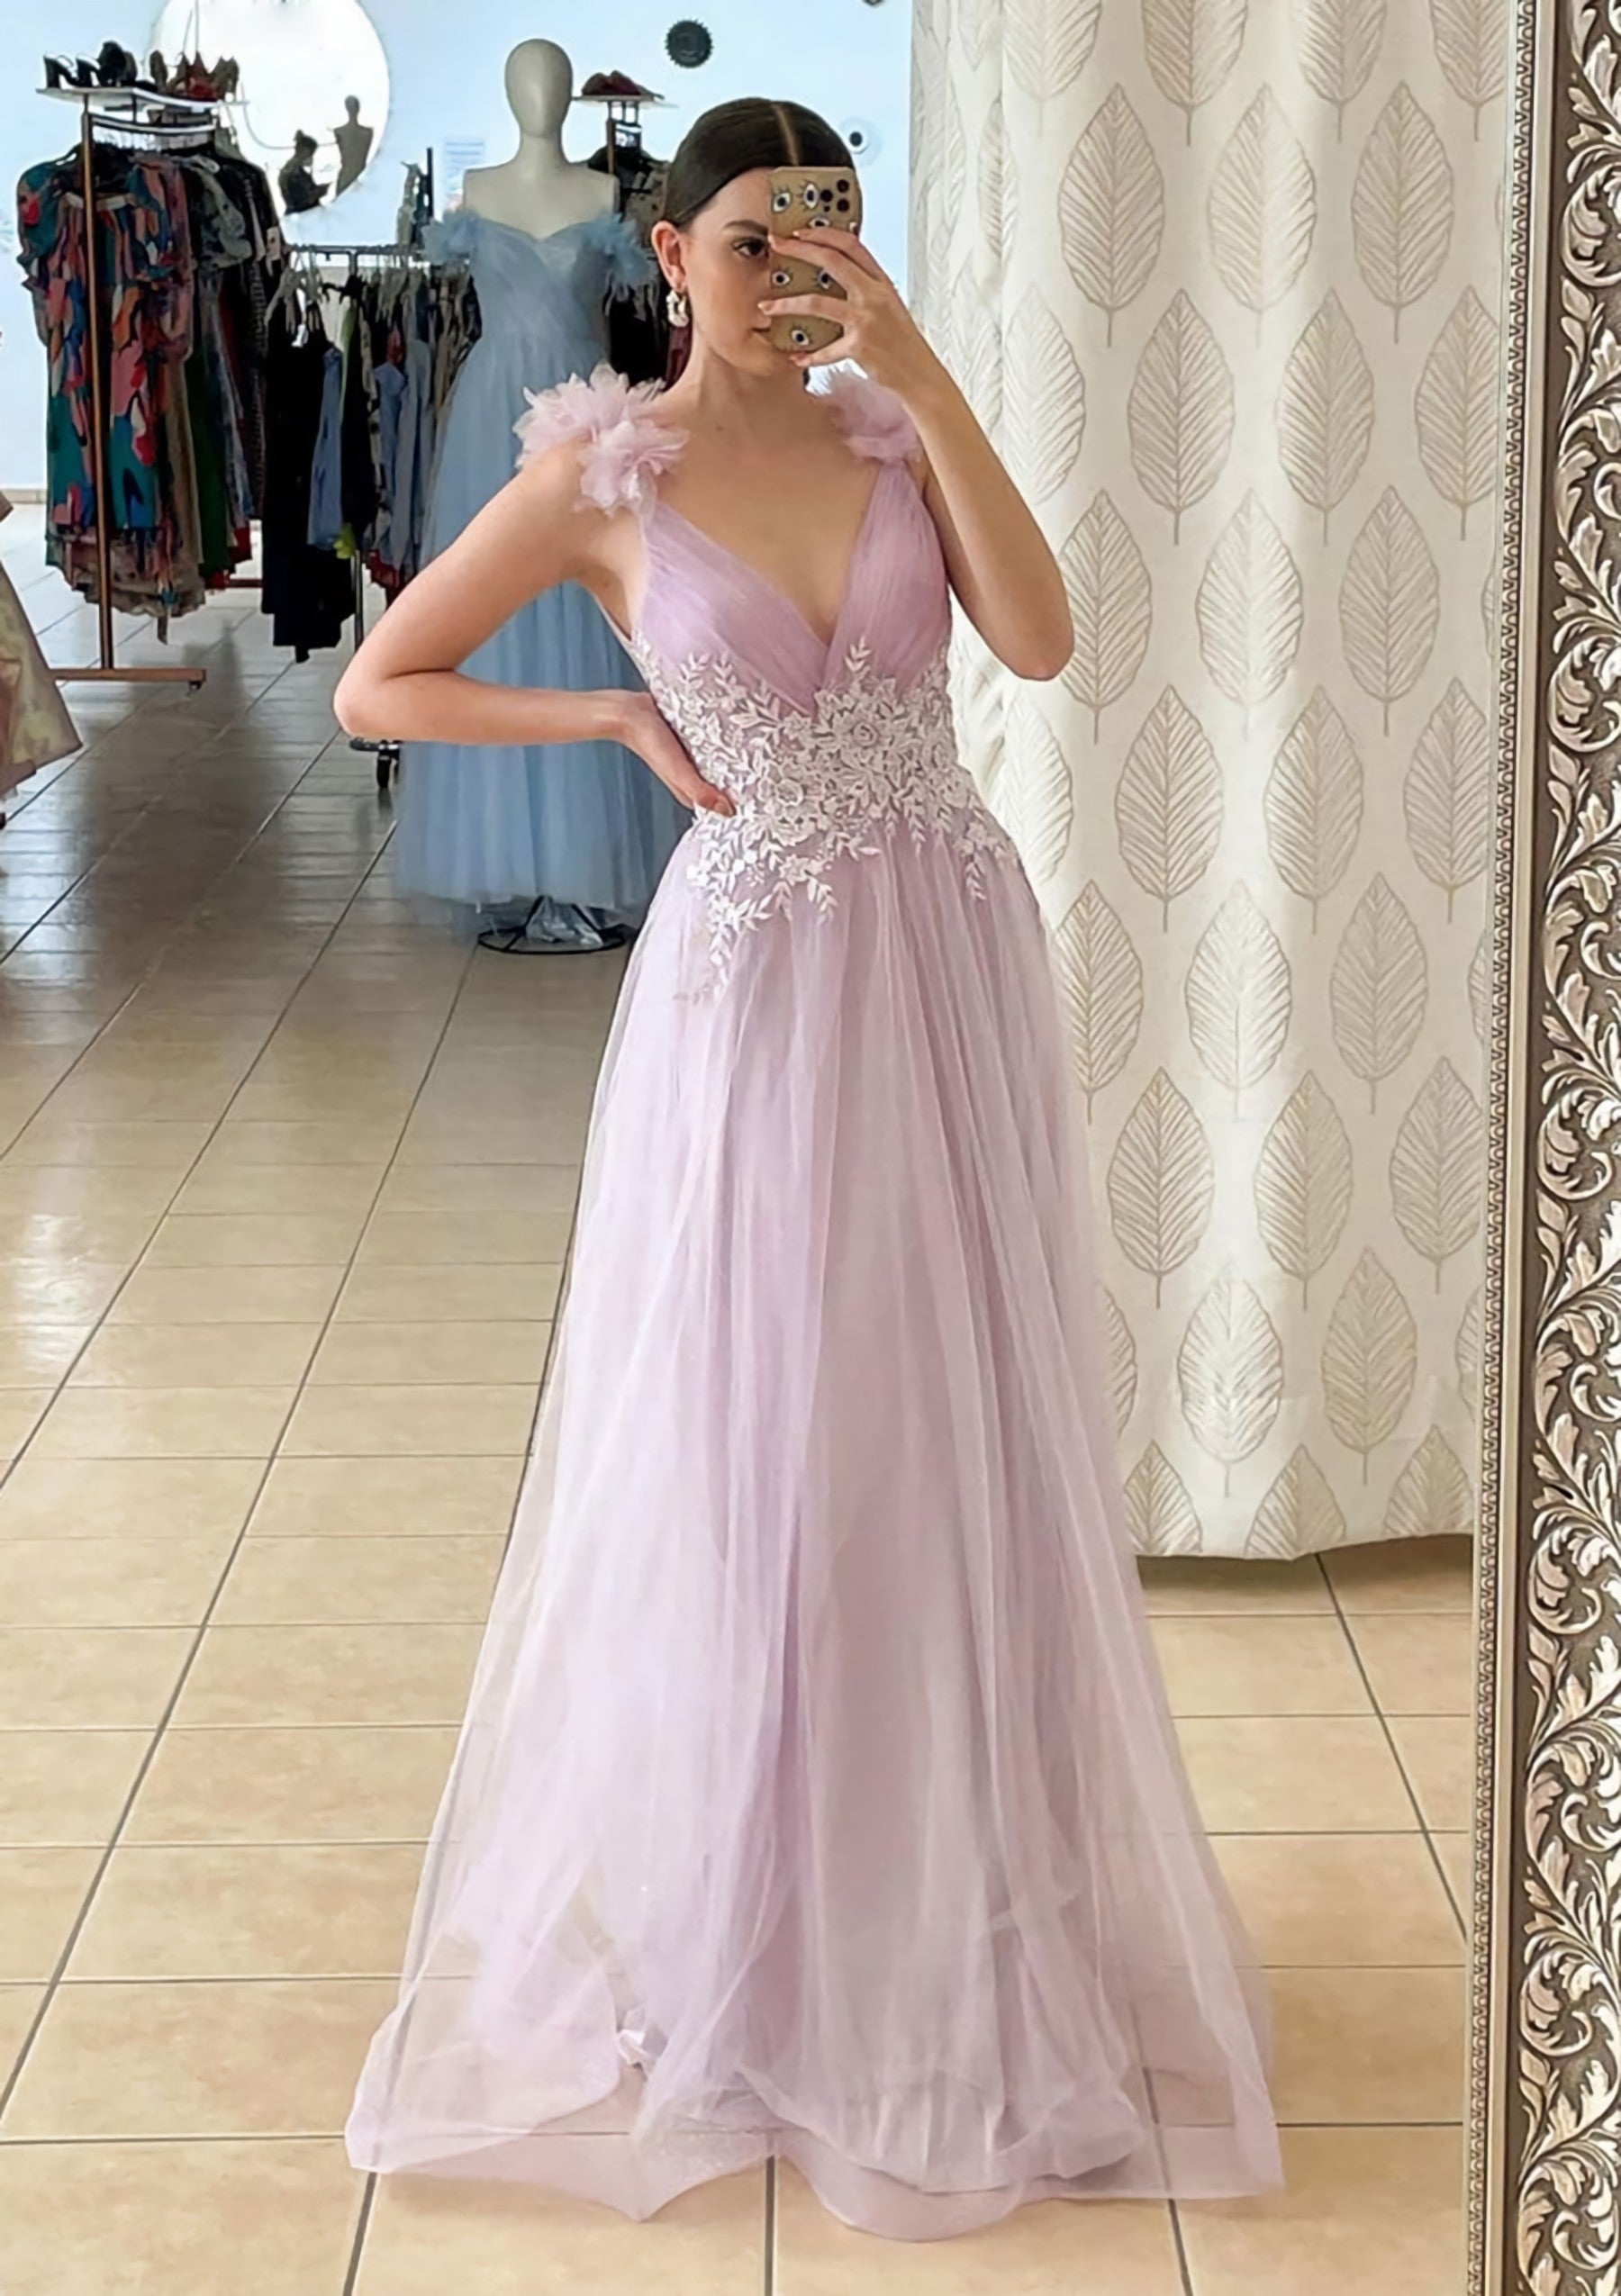 A-line V Neck Sleeveless Long/Floor-Length Tulle Corset Prom Dress With Appliqued Beading Flowers outfit, Prom Dresses Purple